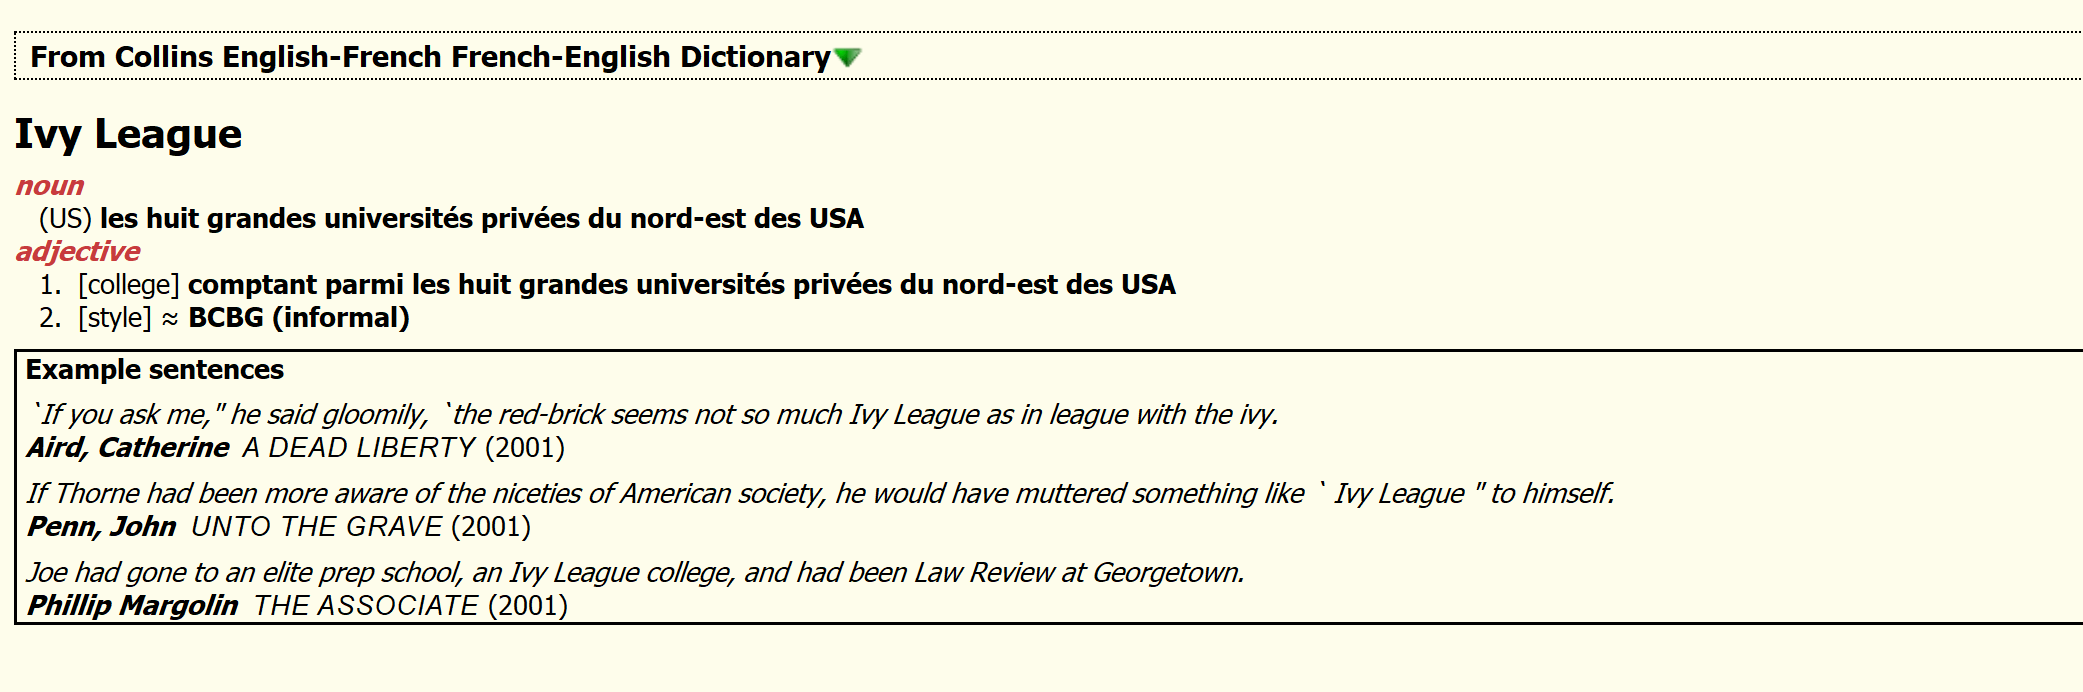 Collins English-French French-English Dictionary